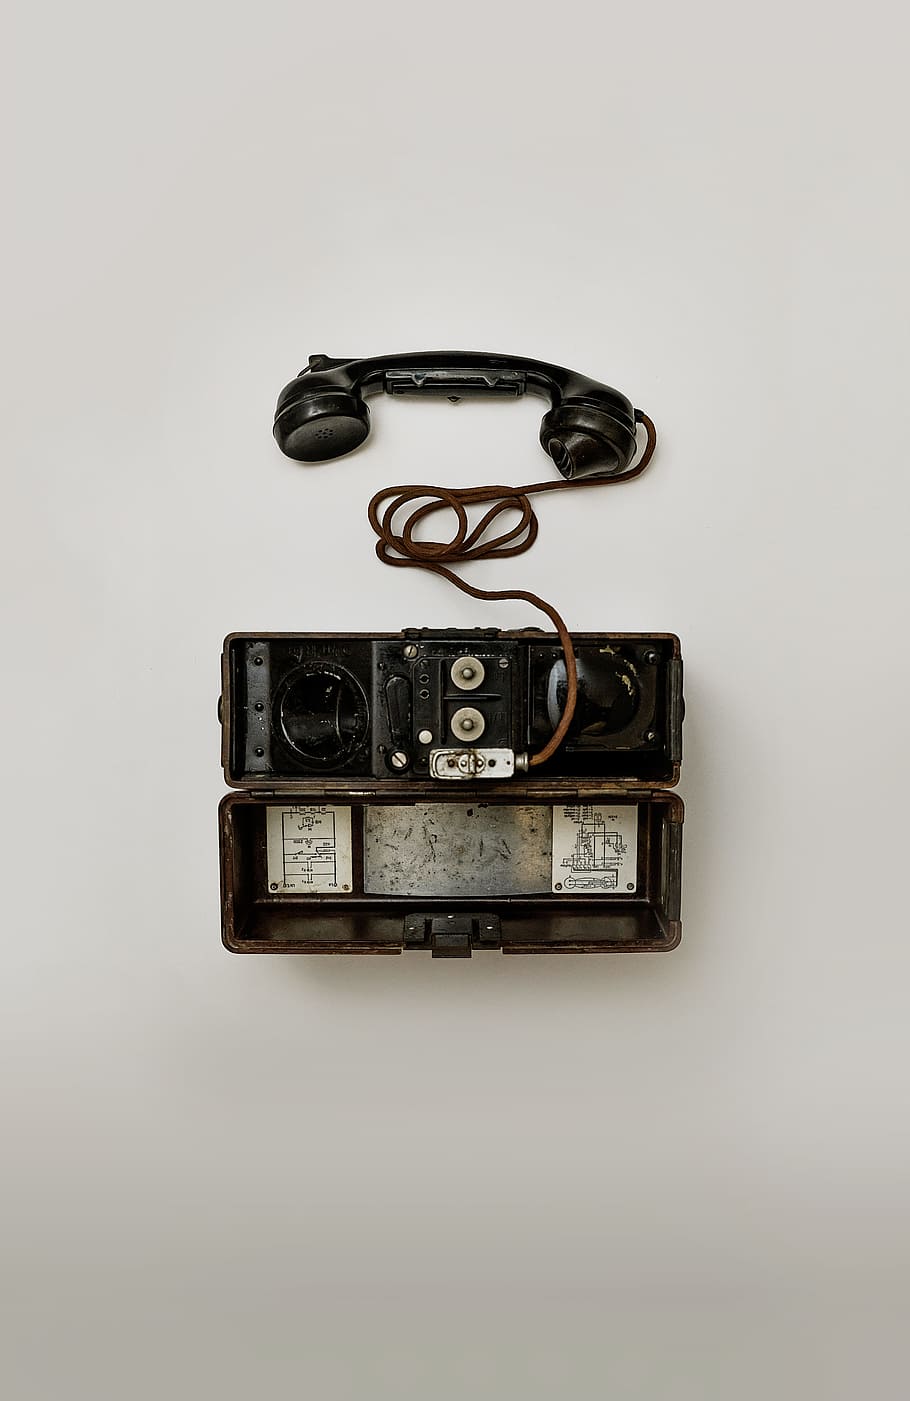 Black Telephone on White Surface, army, box, close-up, electronics, HD wallpaper